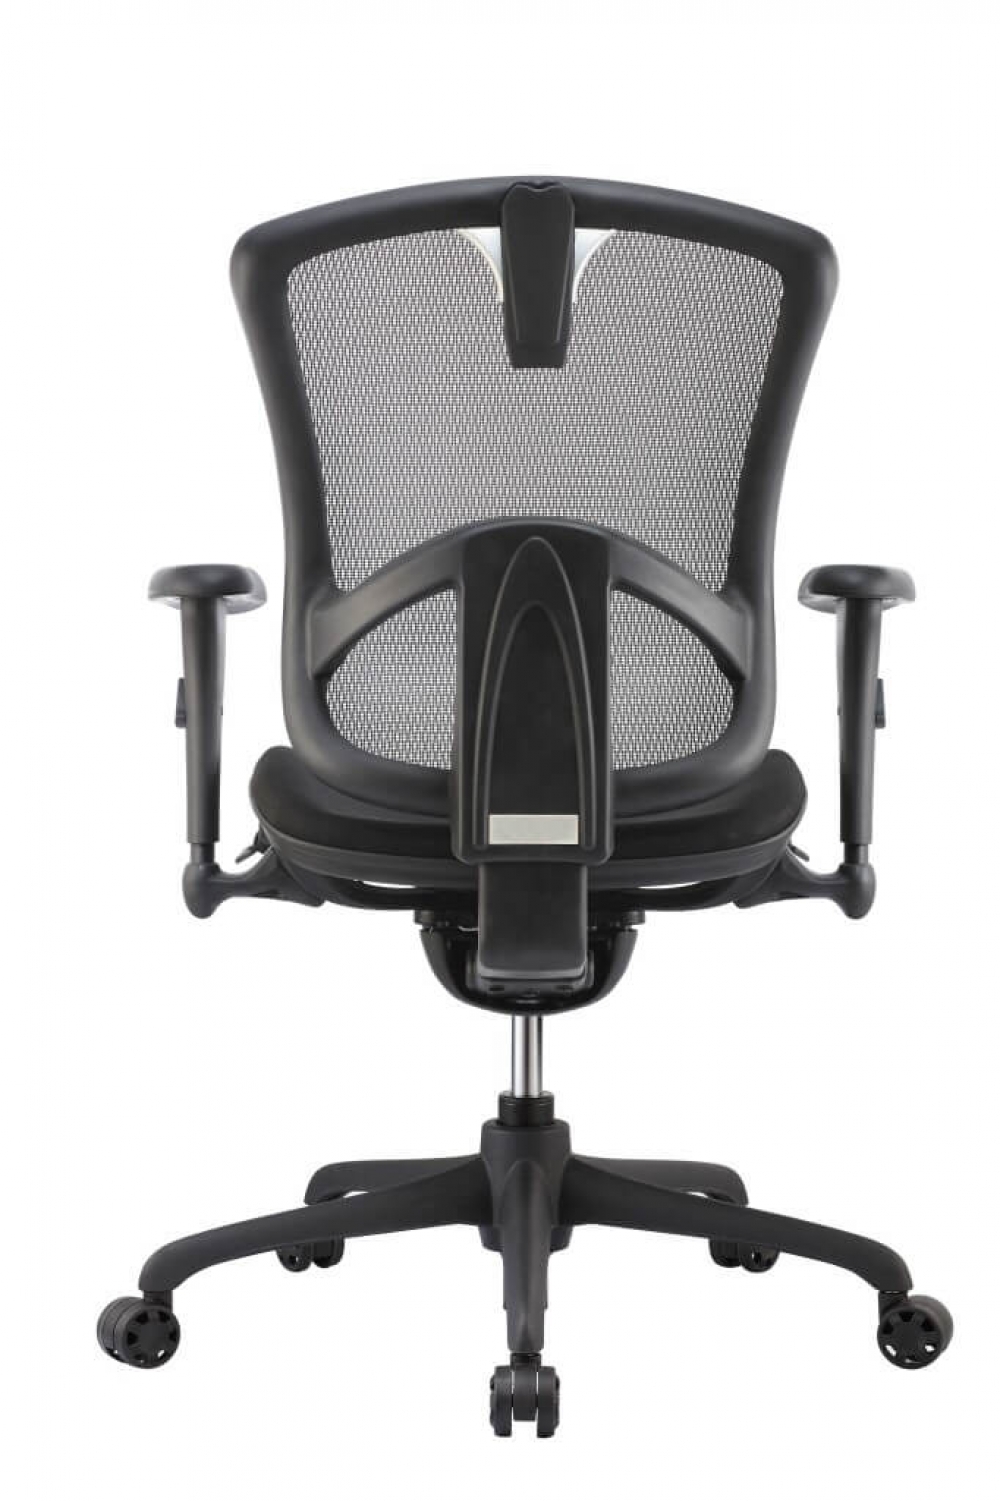 Black office chair rear view